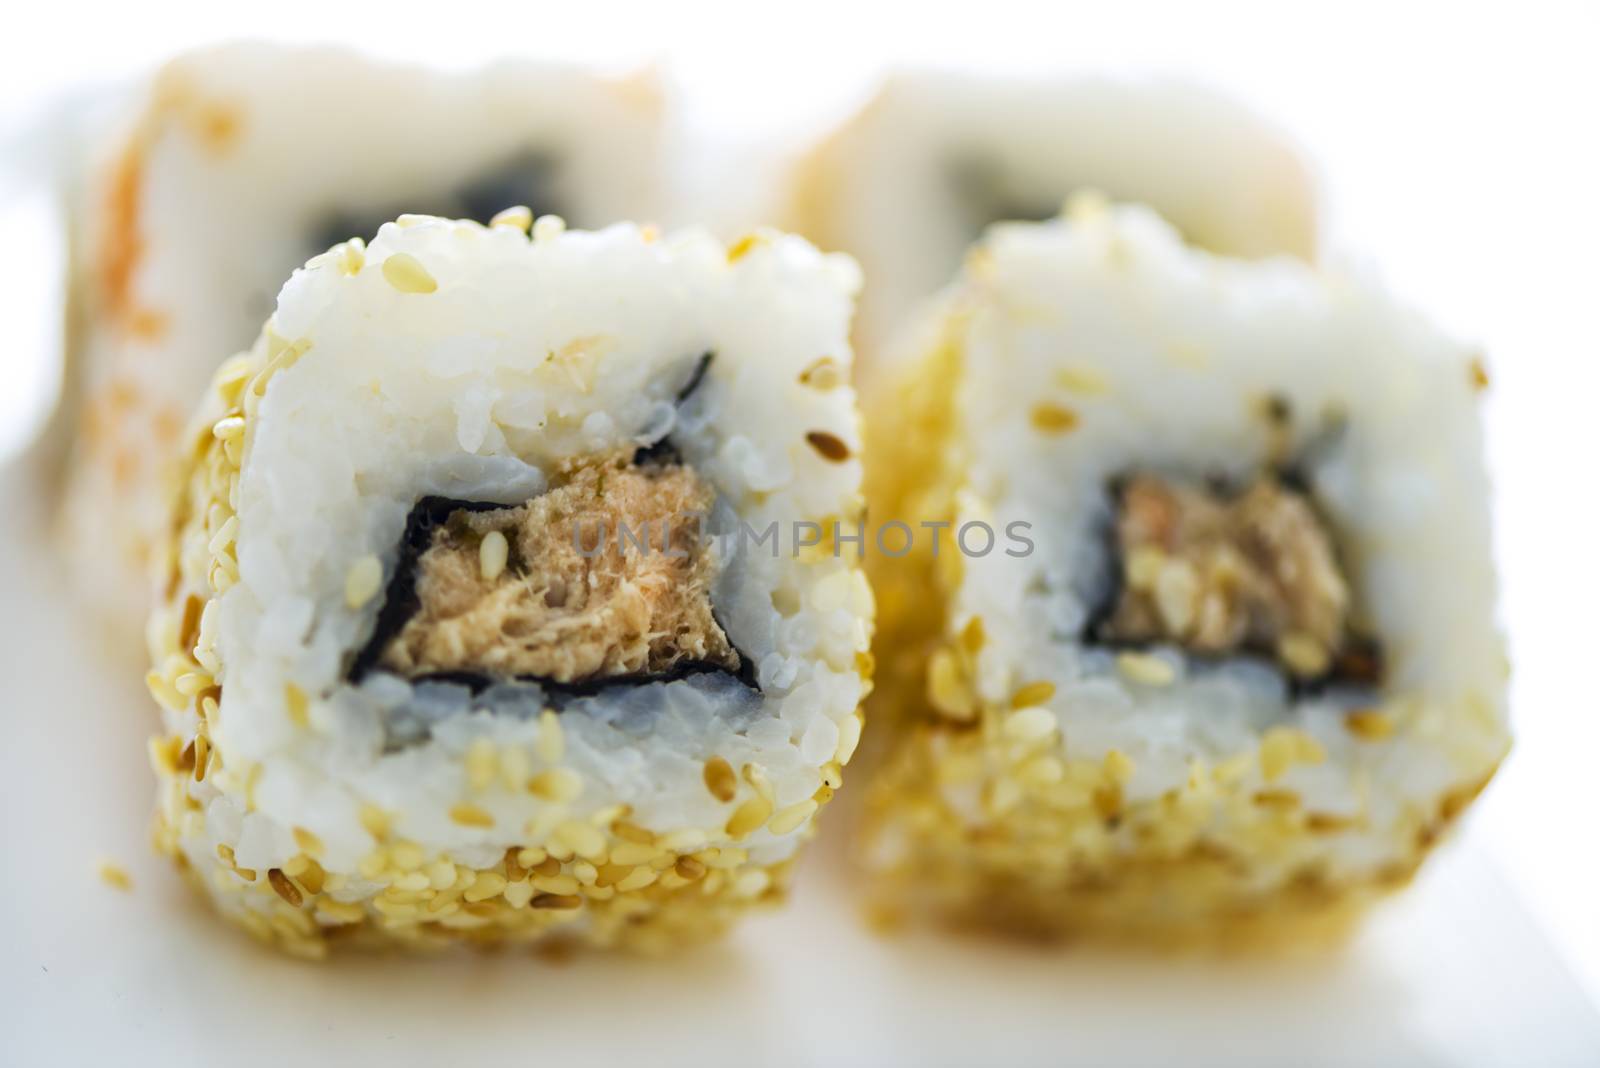 Japanese Cuisine - Sushi Roll with tuna and sesame seed